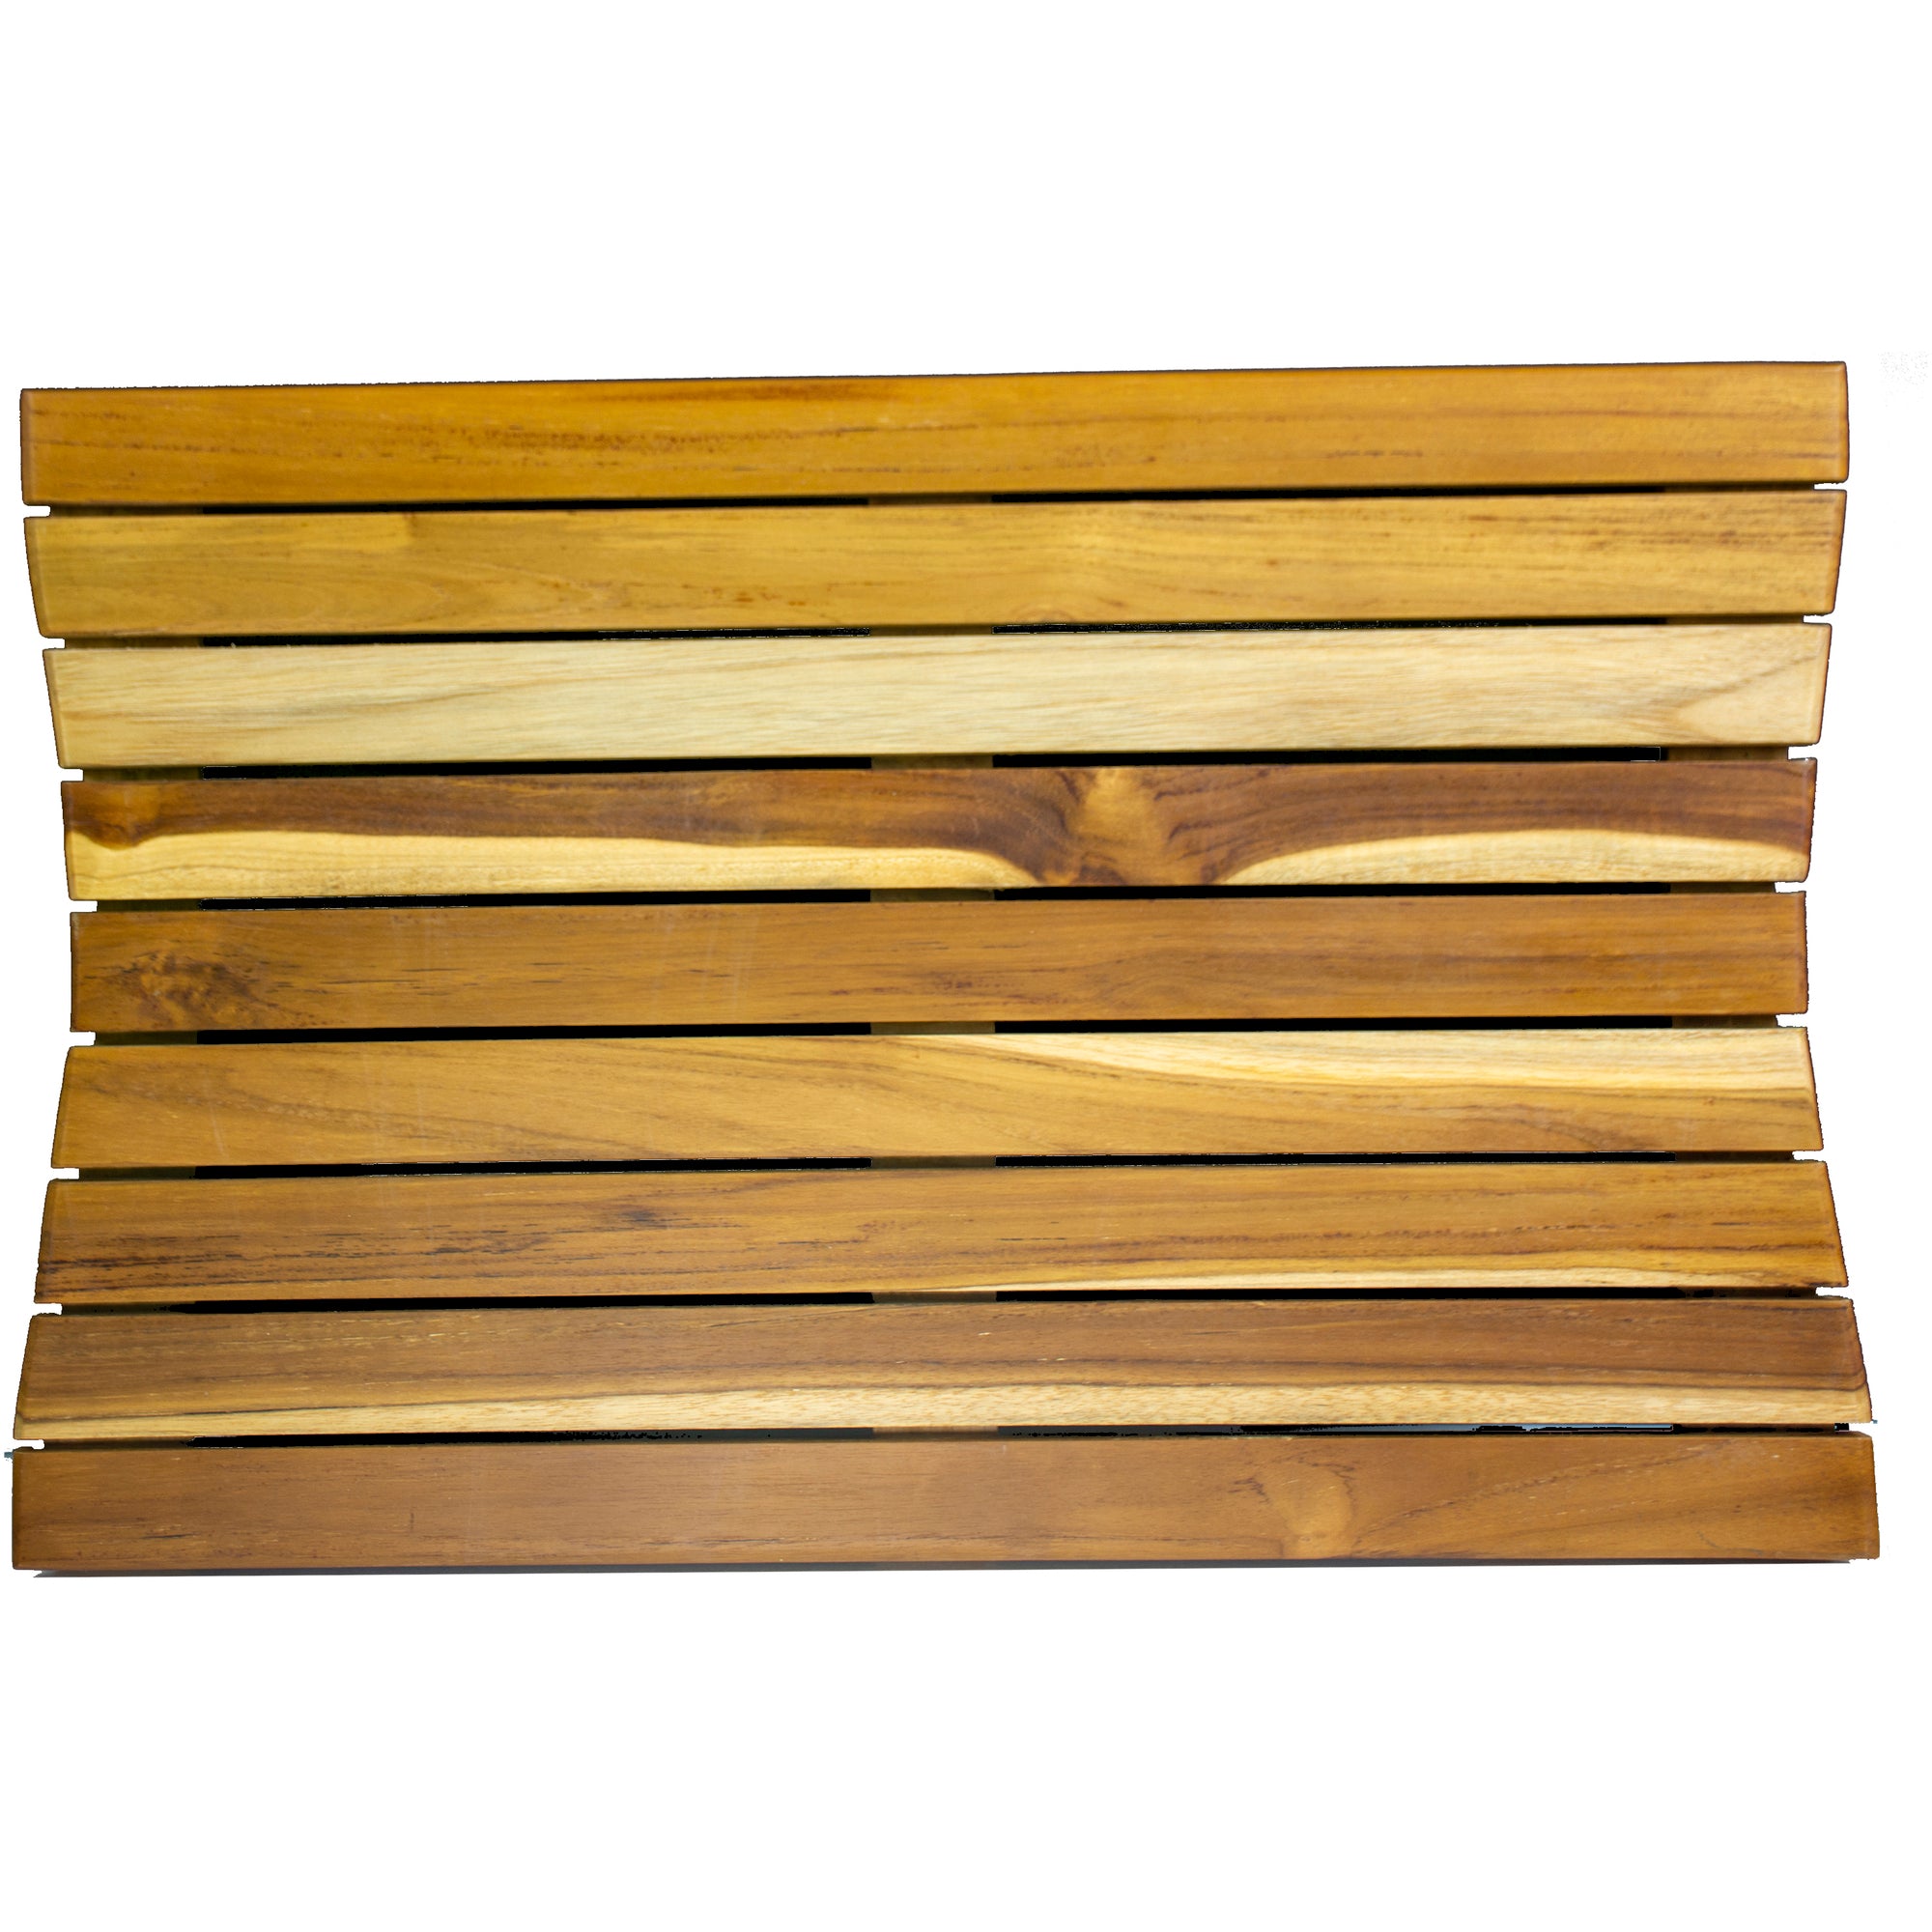 EcoDecors® Eleganto® 29" Teak Wood Bath Tray and Seat with LiftAide® Arms in EarthyTeak Finish - The EcoDecors Eleganto 23" x 15" Slatted Solid Teak Bath Floor Mat in EarthyTeak Finish